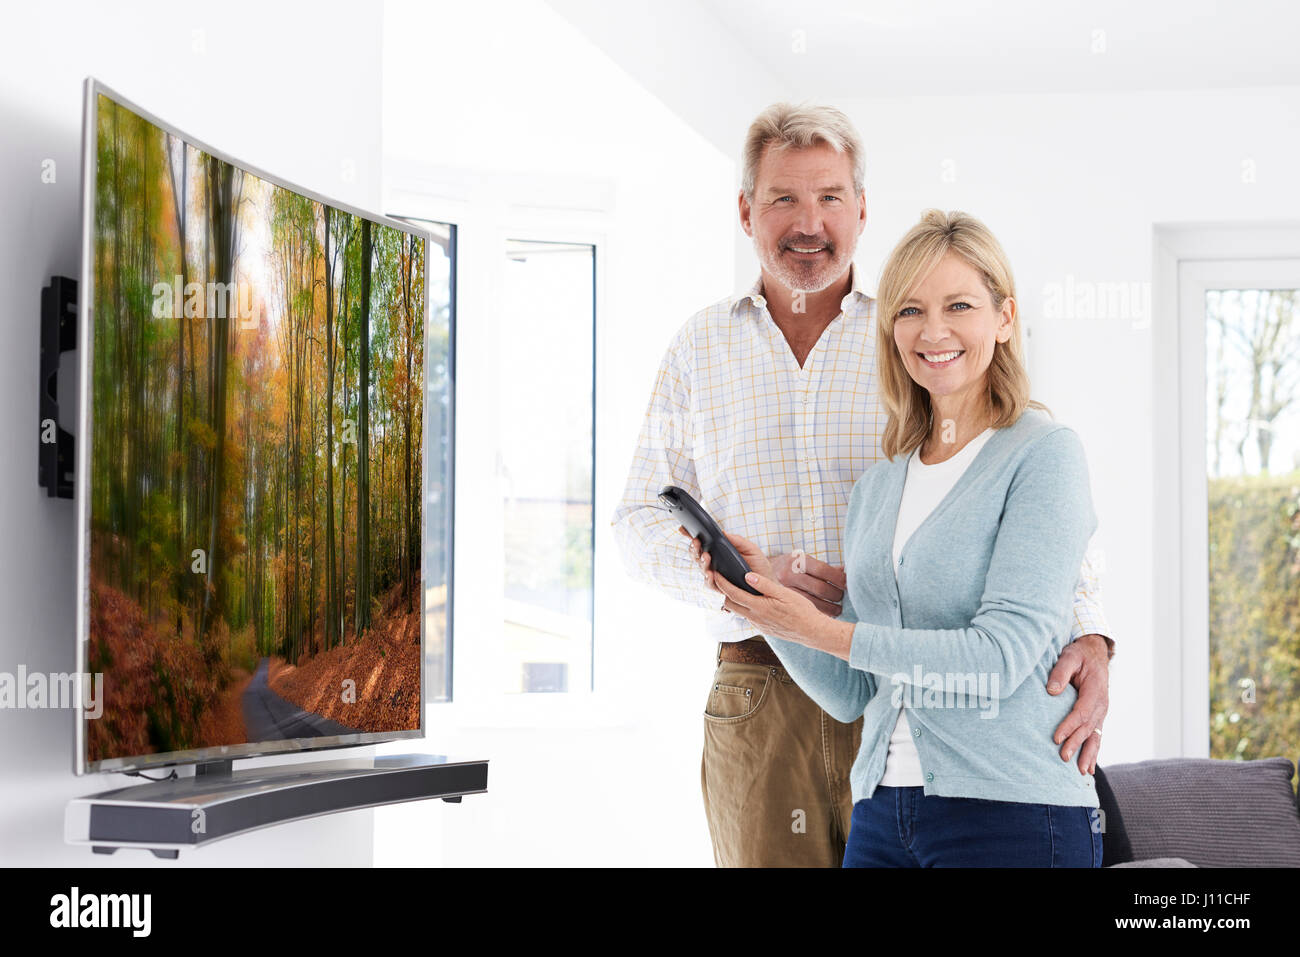 Mature Couple With New Curved Screen Television At Home Stock Photo